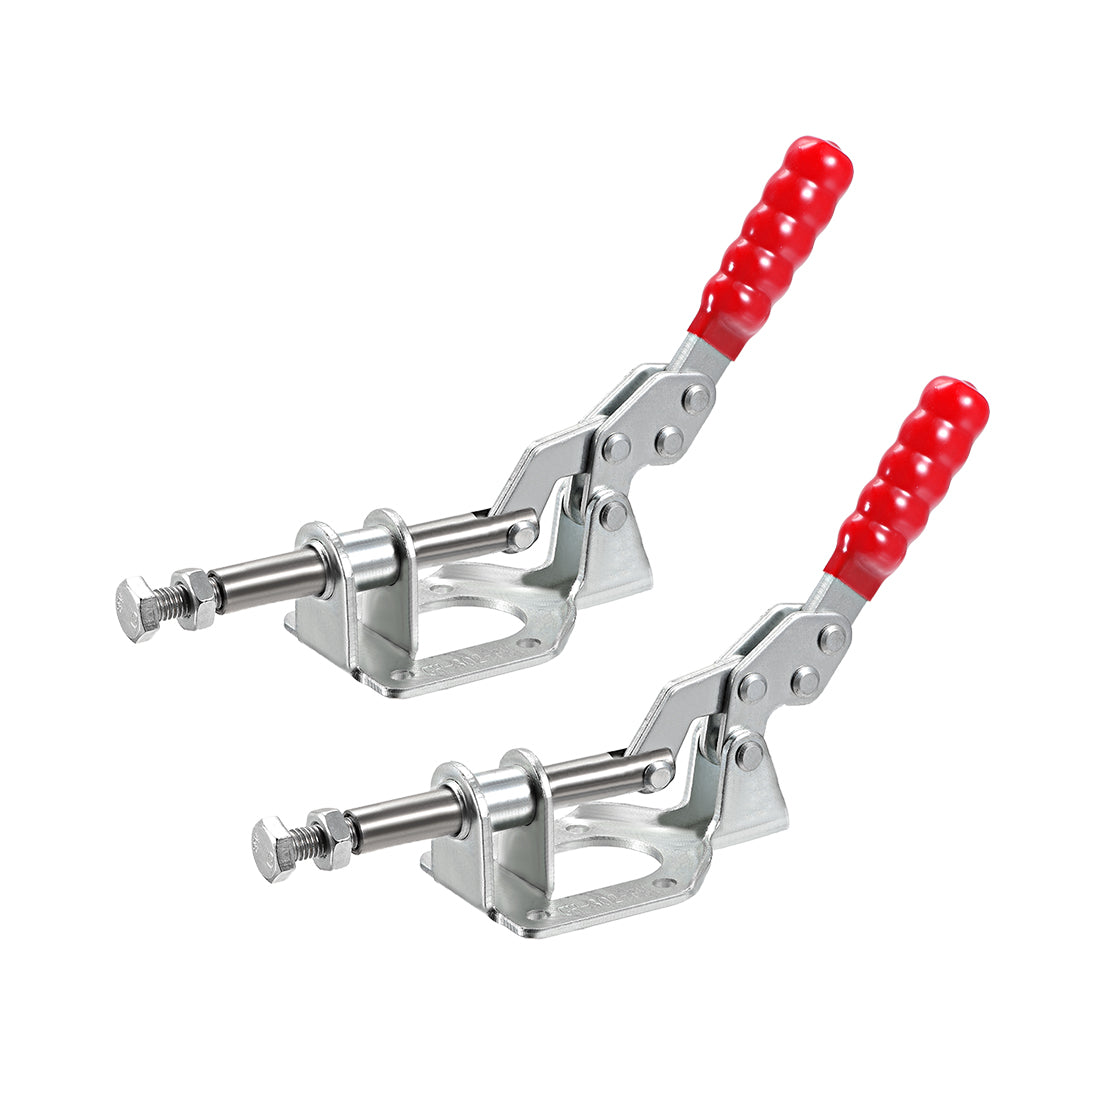 uxcell Uxcell 2 Pcs Hand Tool Pull Push Action Toggle Clamp Quick Release Clamp 330 Lbs/150kg Holding Capacity 32mm Stroke